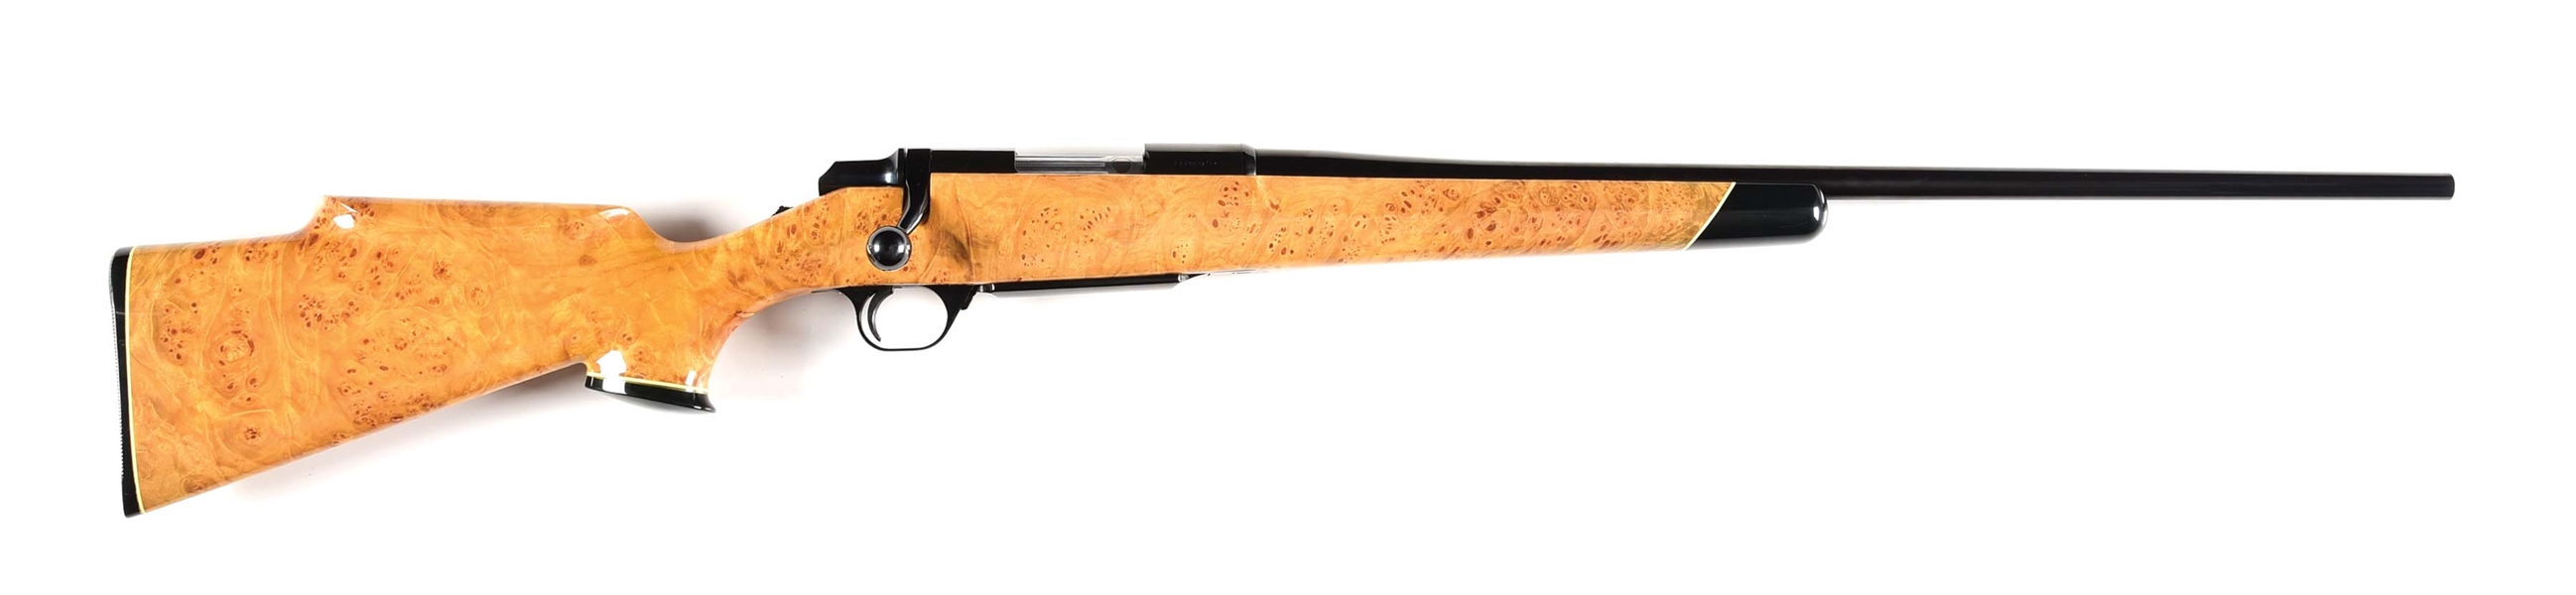 (M) BURL MAPLE STOCKED BROWNING BBR BOLT ACTION RIFLE.